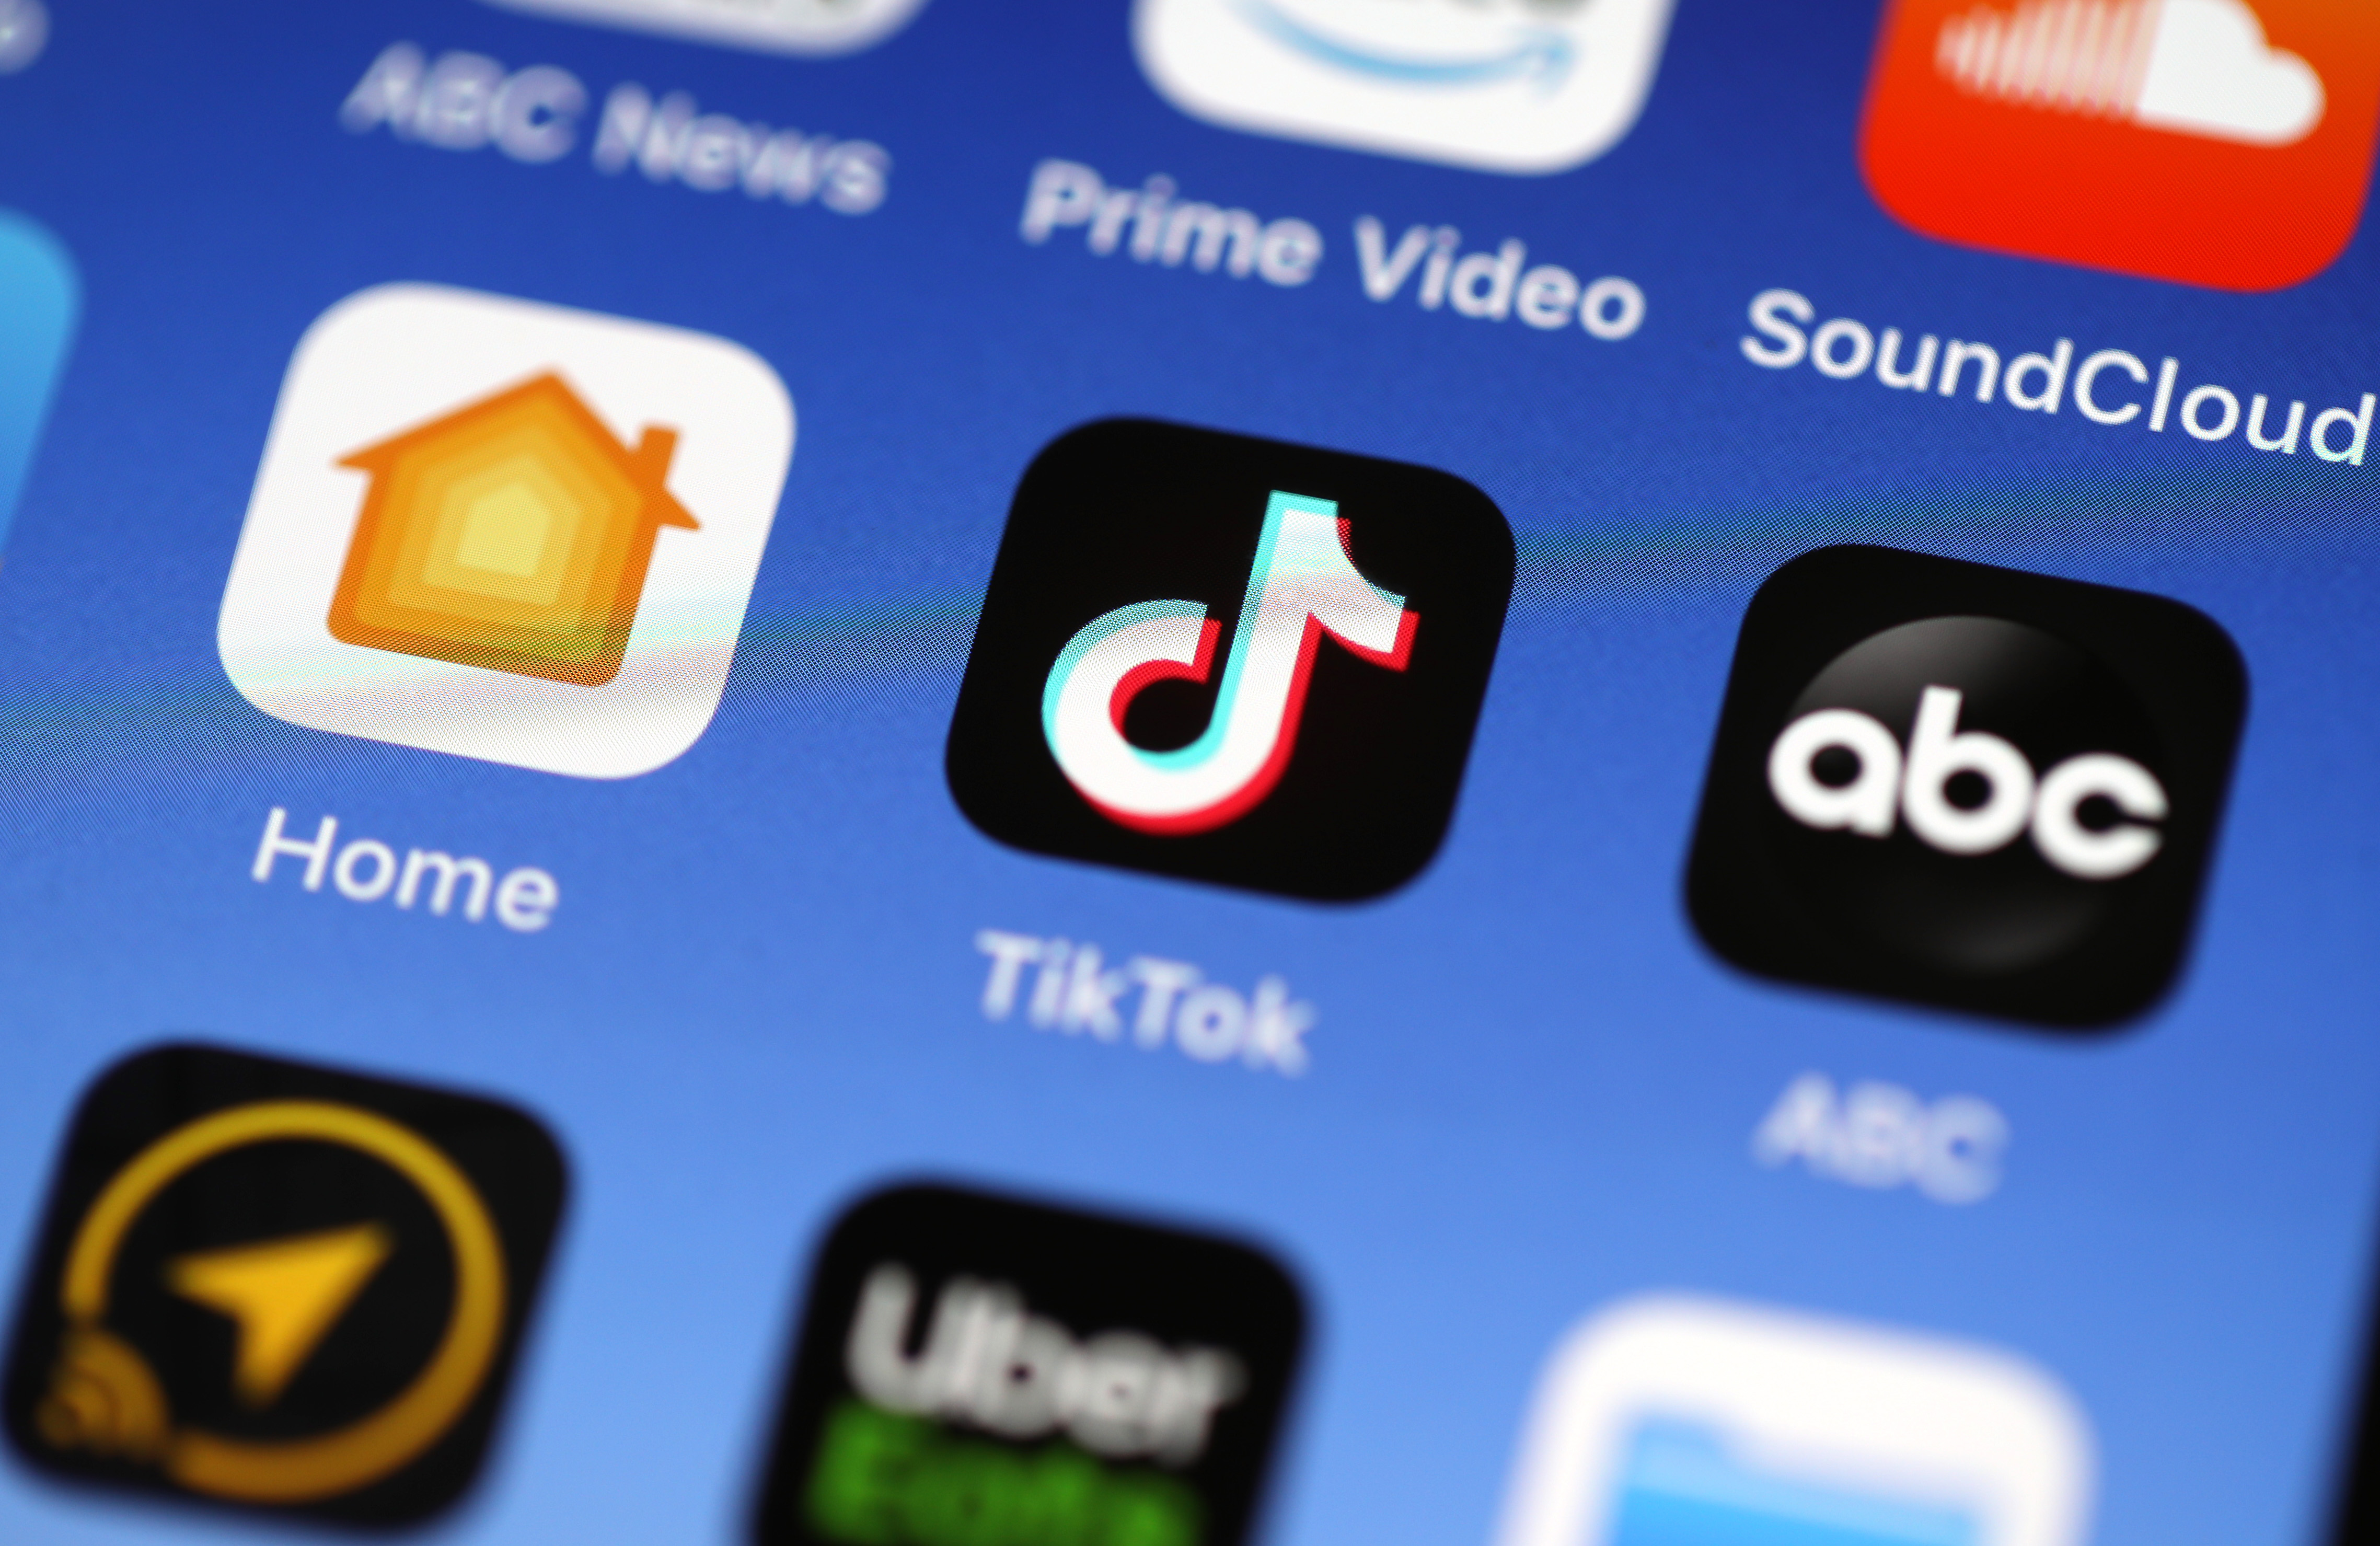 TikTok May Be Getting Banned In The U.S.